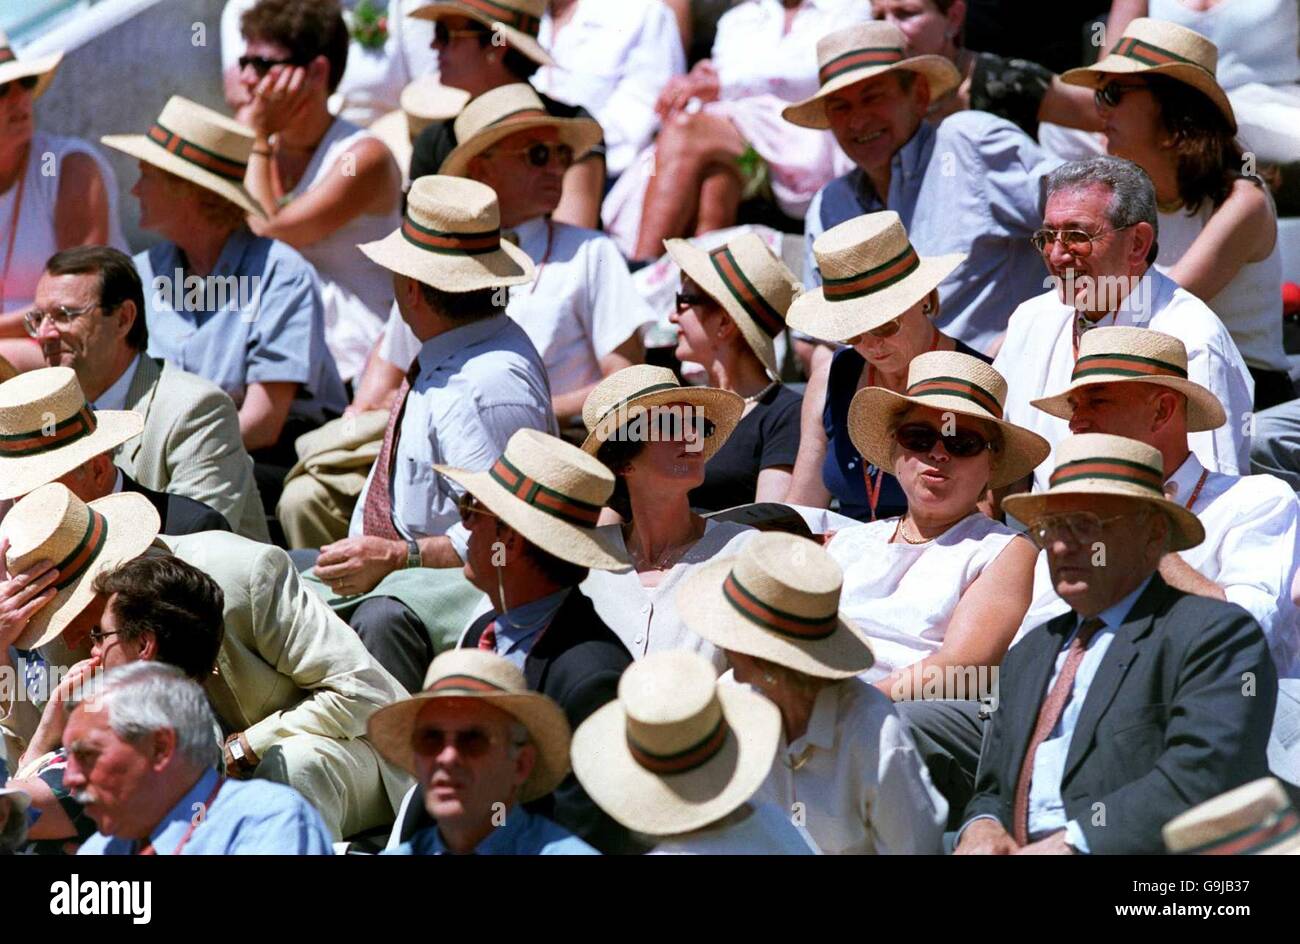 Spectators Wearing Hats French Open High Resolution Stock Photography and  Images - Alamy